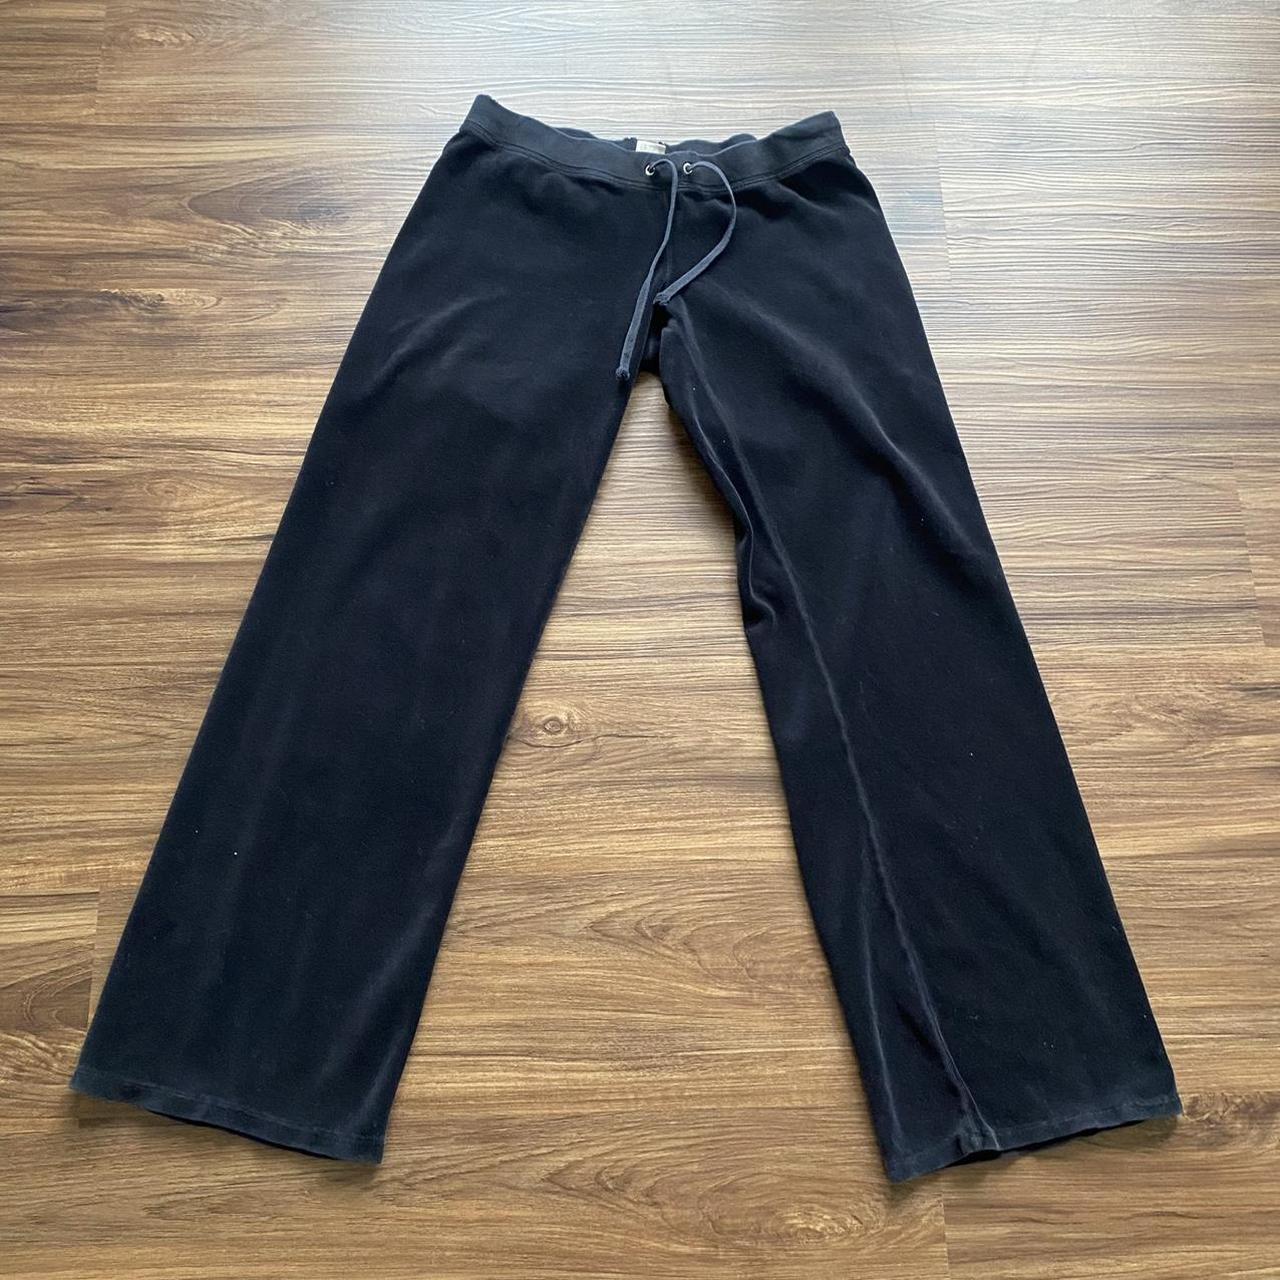 Juicy Couture Black Trousers